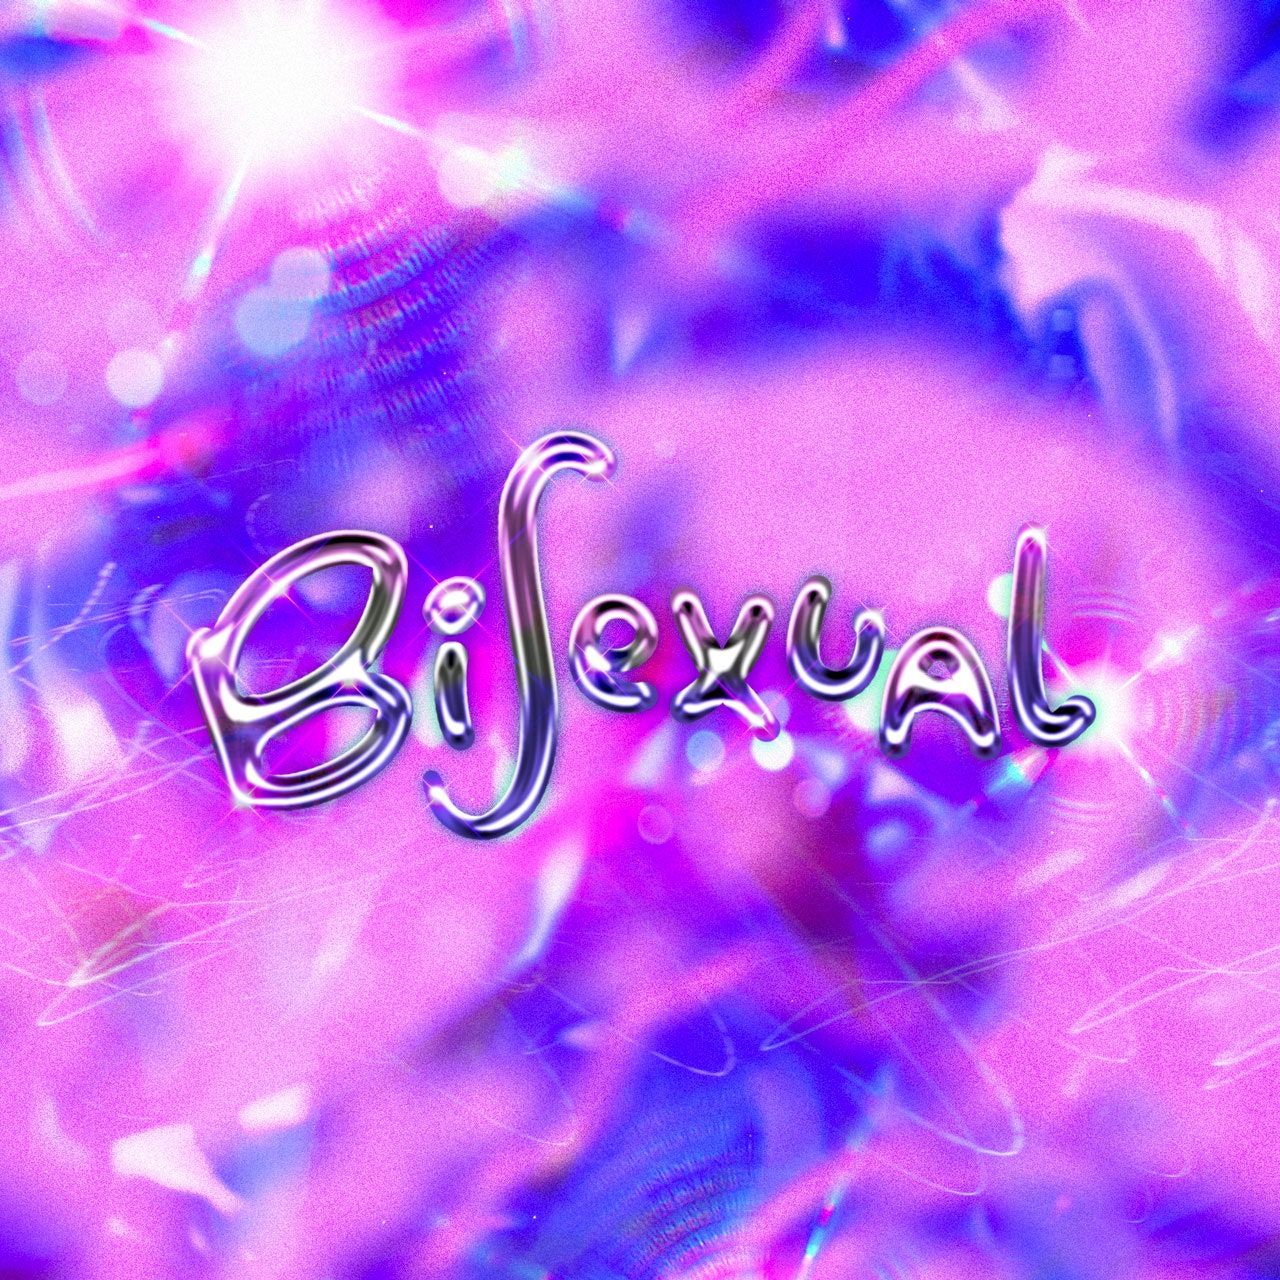 A purple and blue image with the word bisexual in the middle - Bisexual